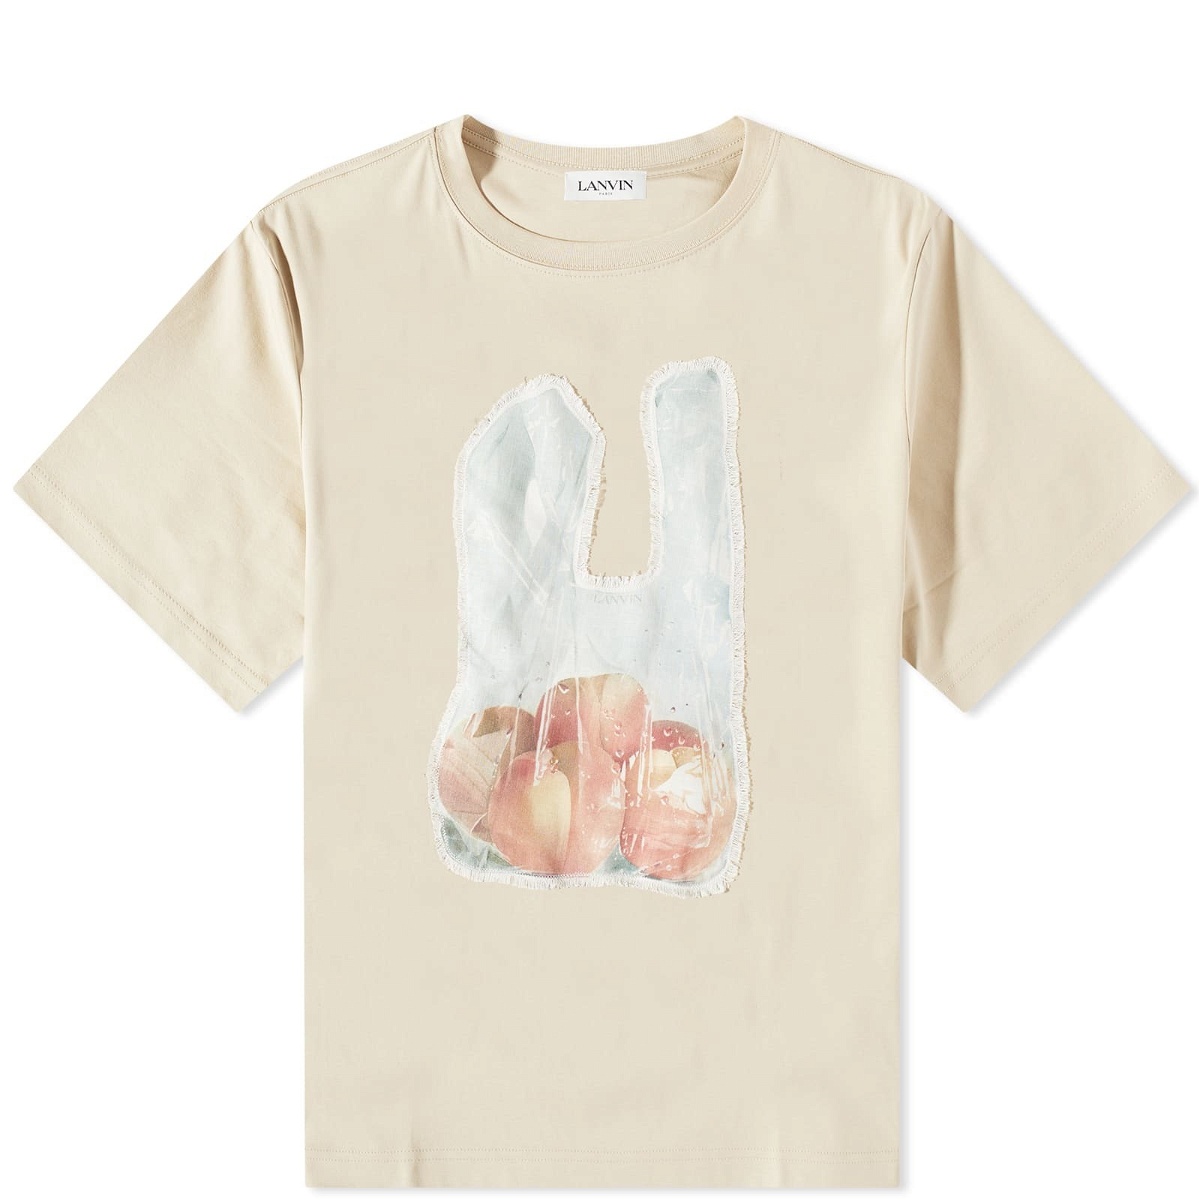 Lanvin Men's Scented Boxy T-Shirt in Sand Lanvin